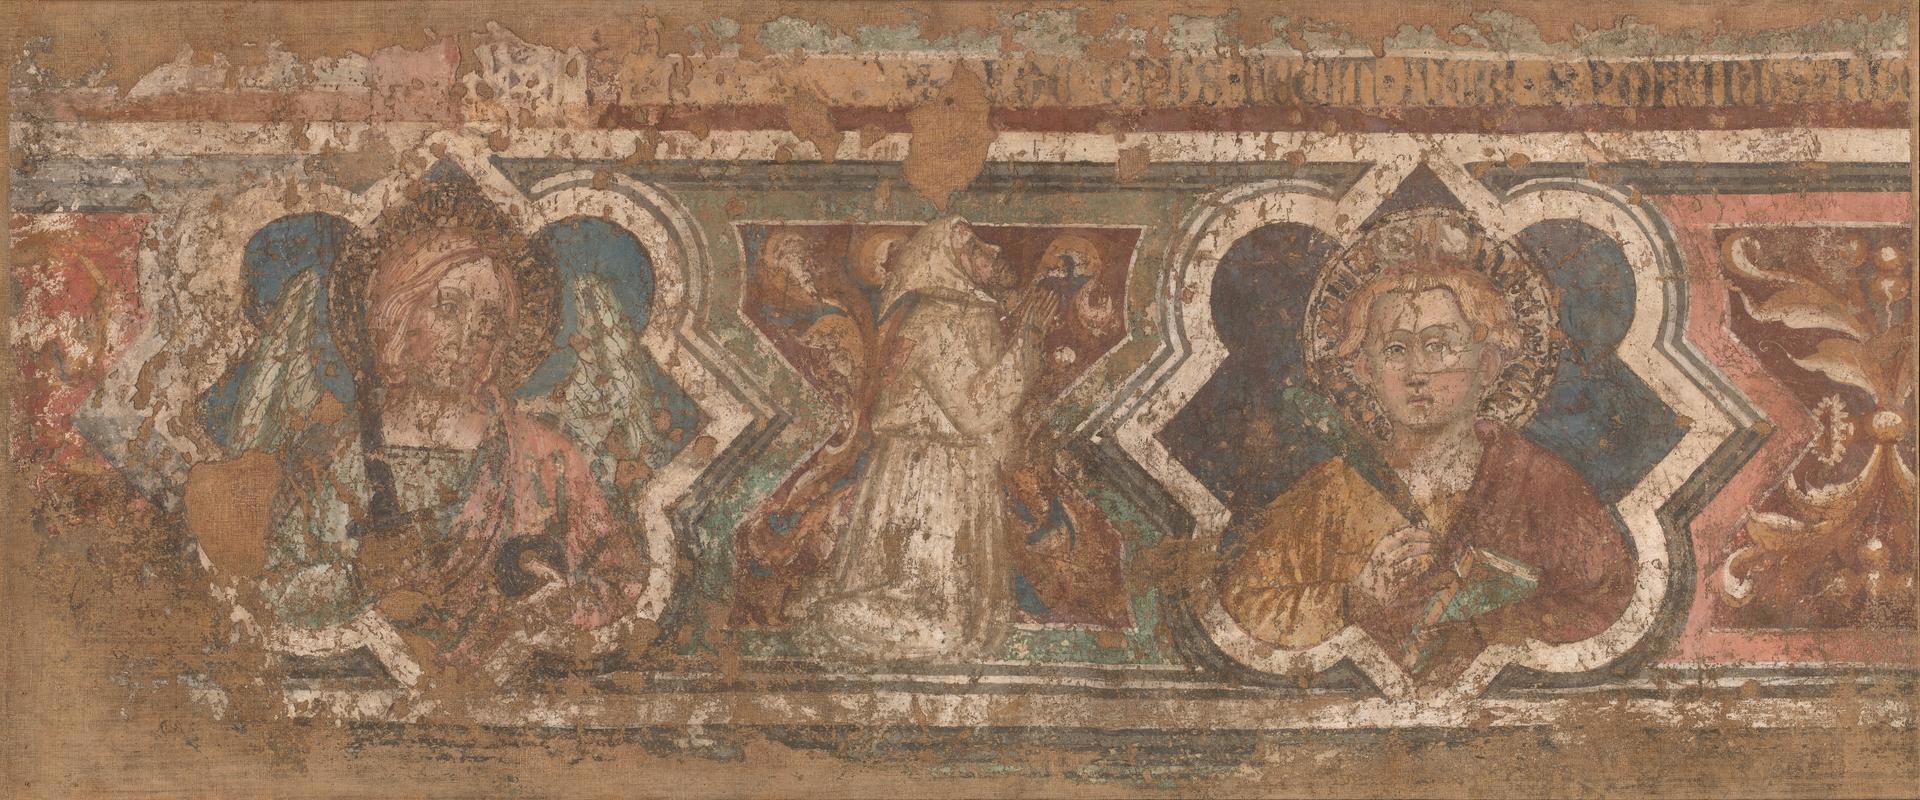 Decorative Border with a Kneeling Flagellant and Saints by Spinello Aretino